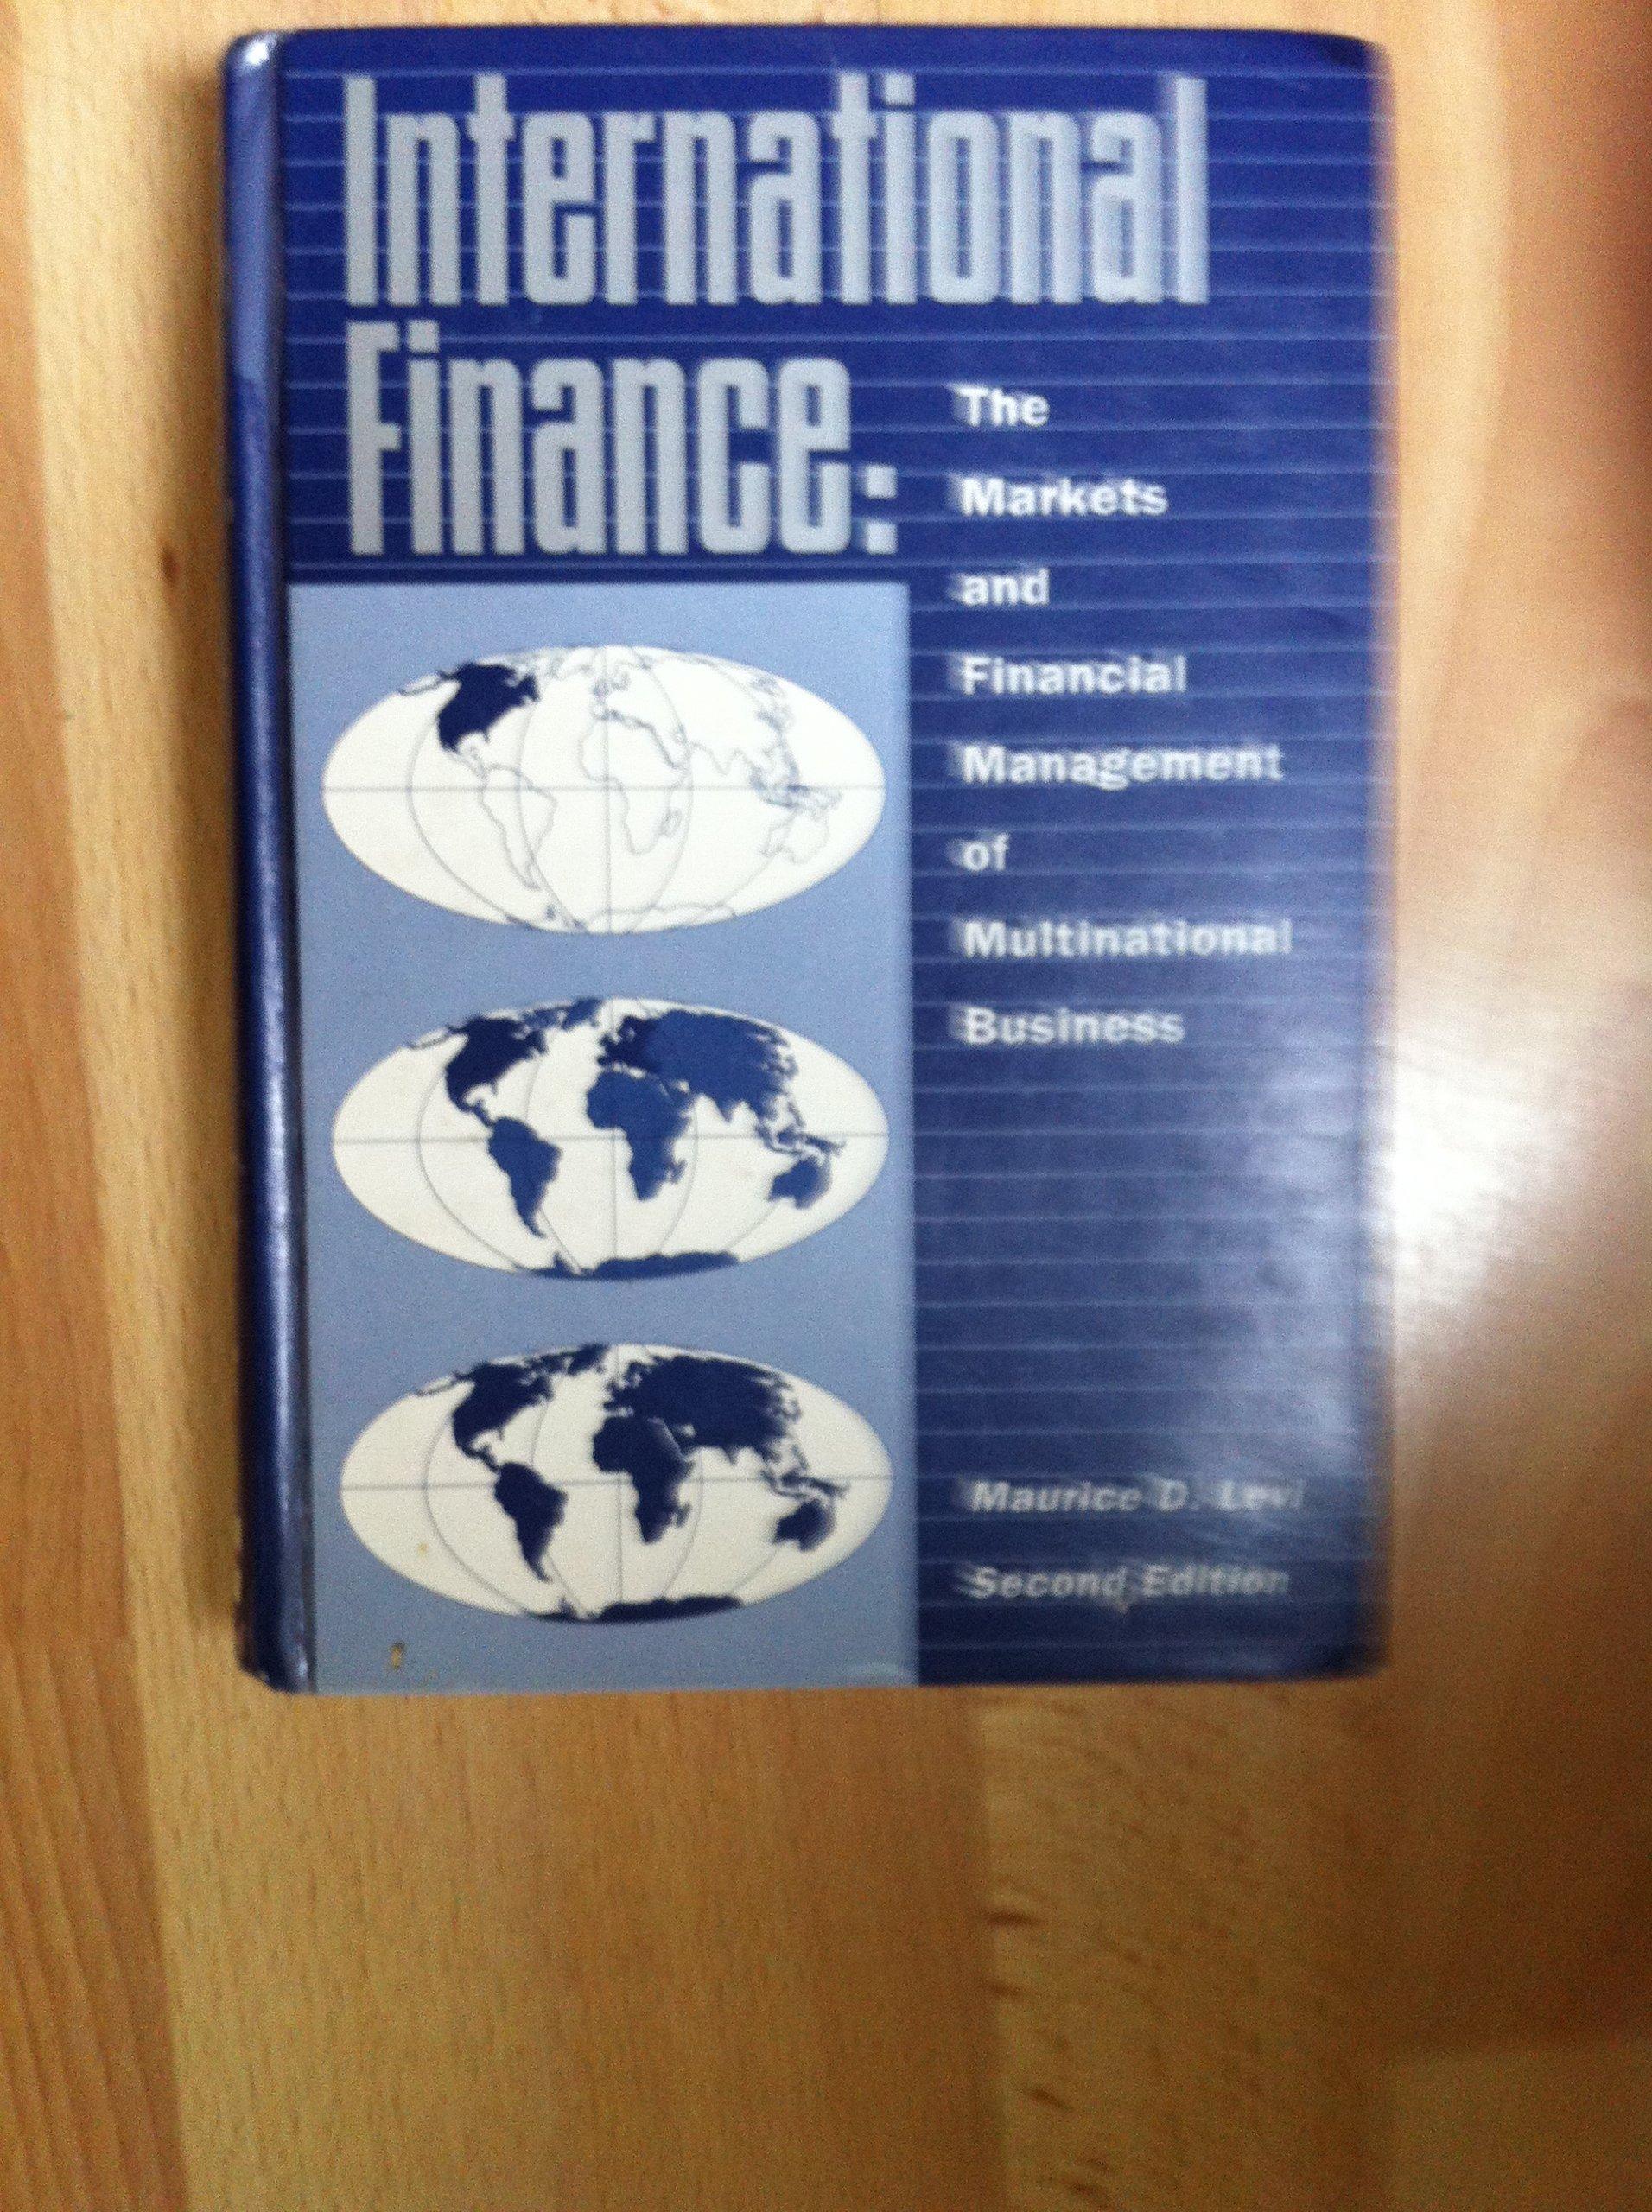 international finance the markets and financial management of multinational business 2nd edition maurice d.